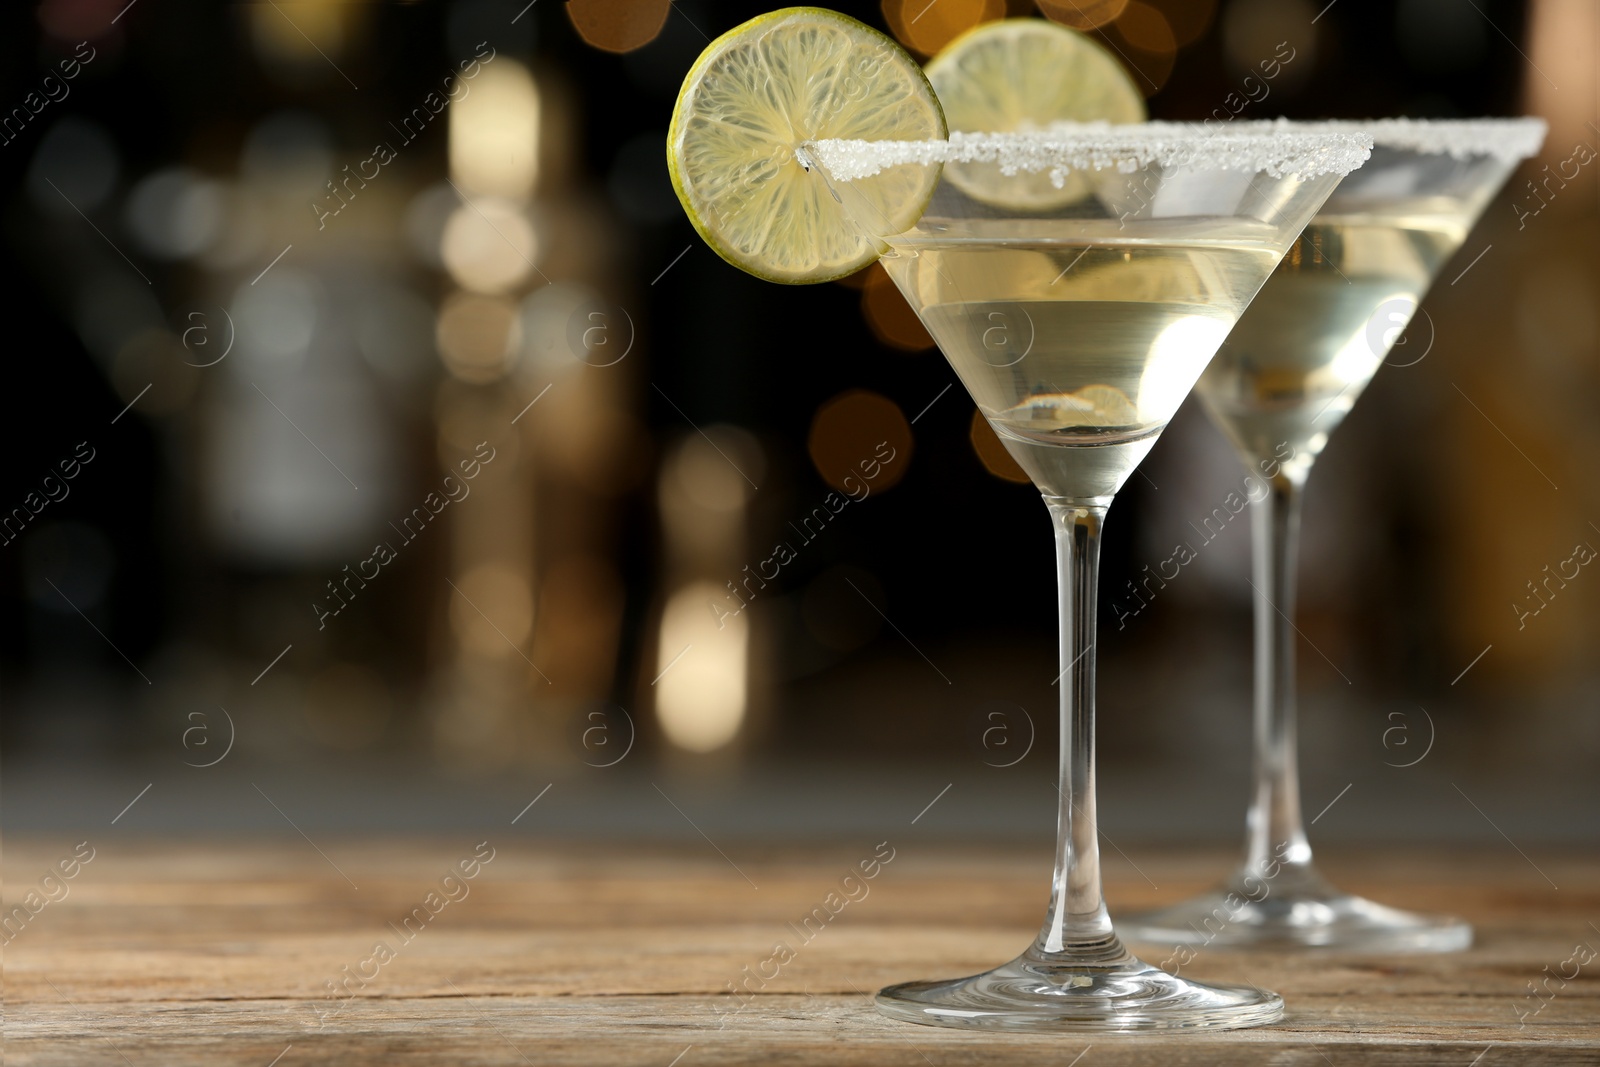 Photo of Glasses of Lime Drop Martini cocktail on wooden table against blurred background. Space for text